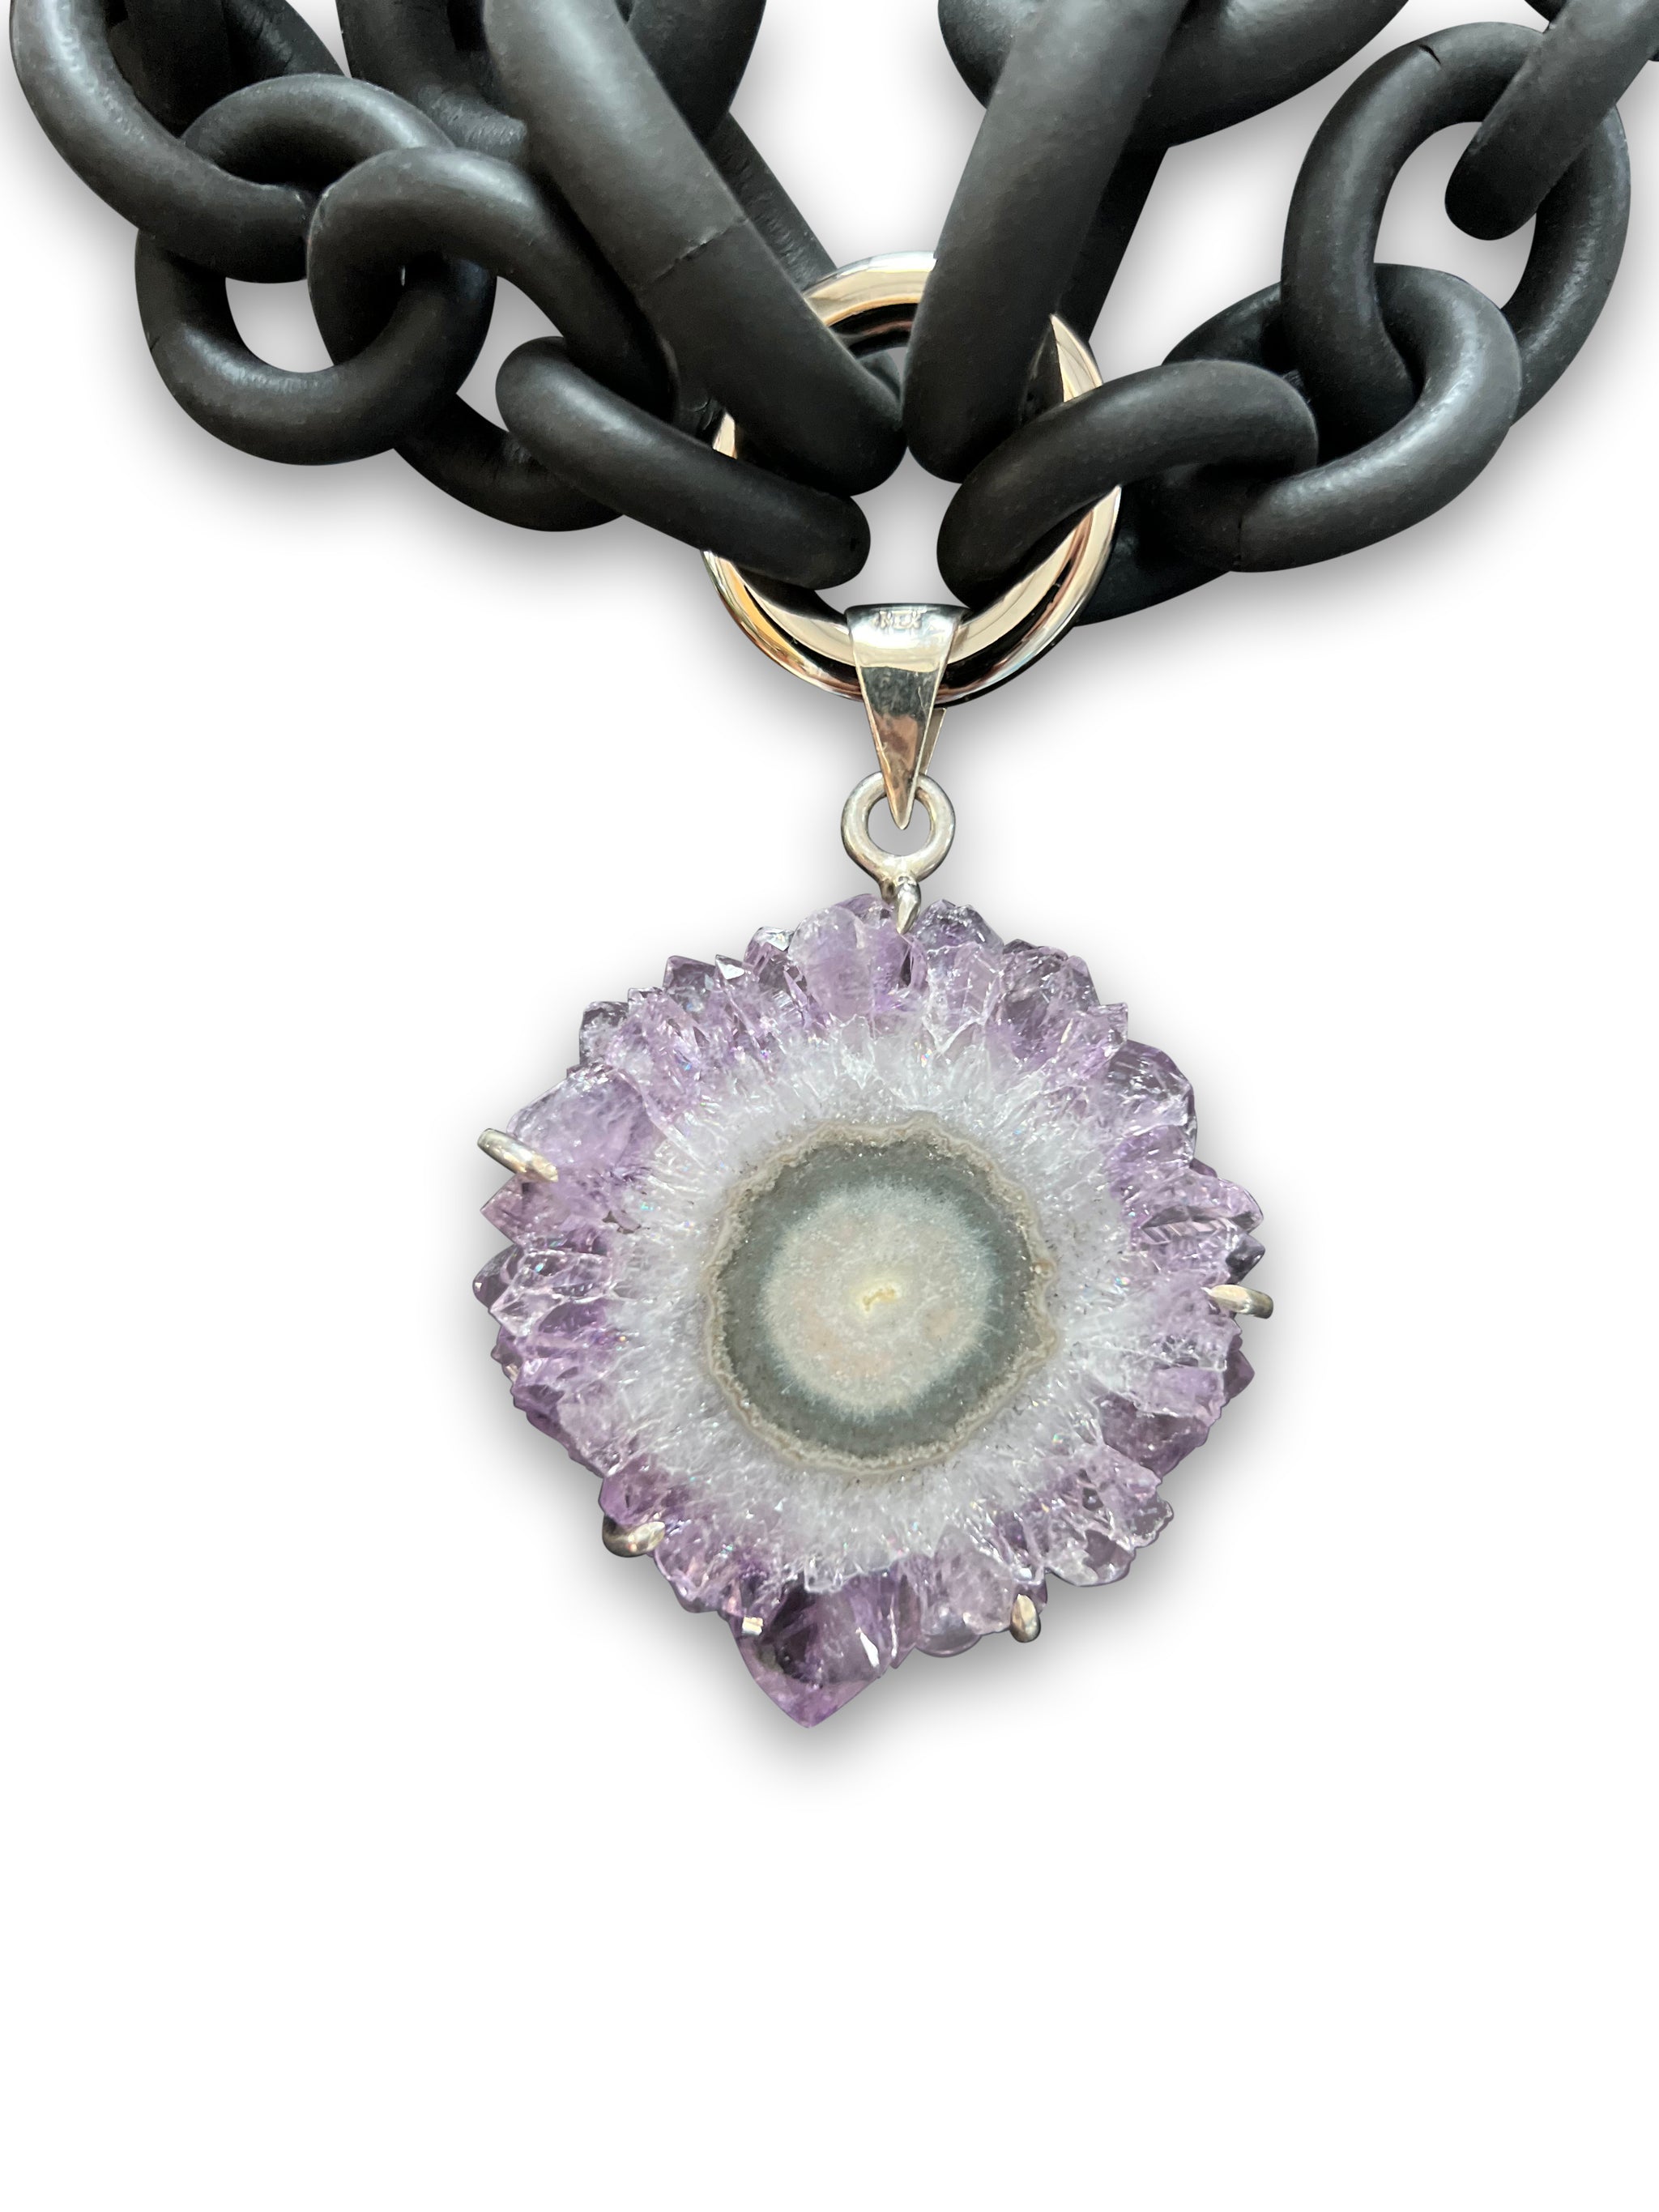 2-STRAND BLACK RUBBER NECKLACE WITH AN AMETHYST STALACTITE WRAPPED IN SILVER. by NYET JEWELRY.